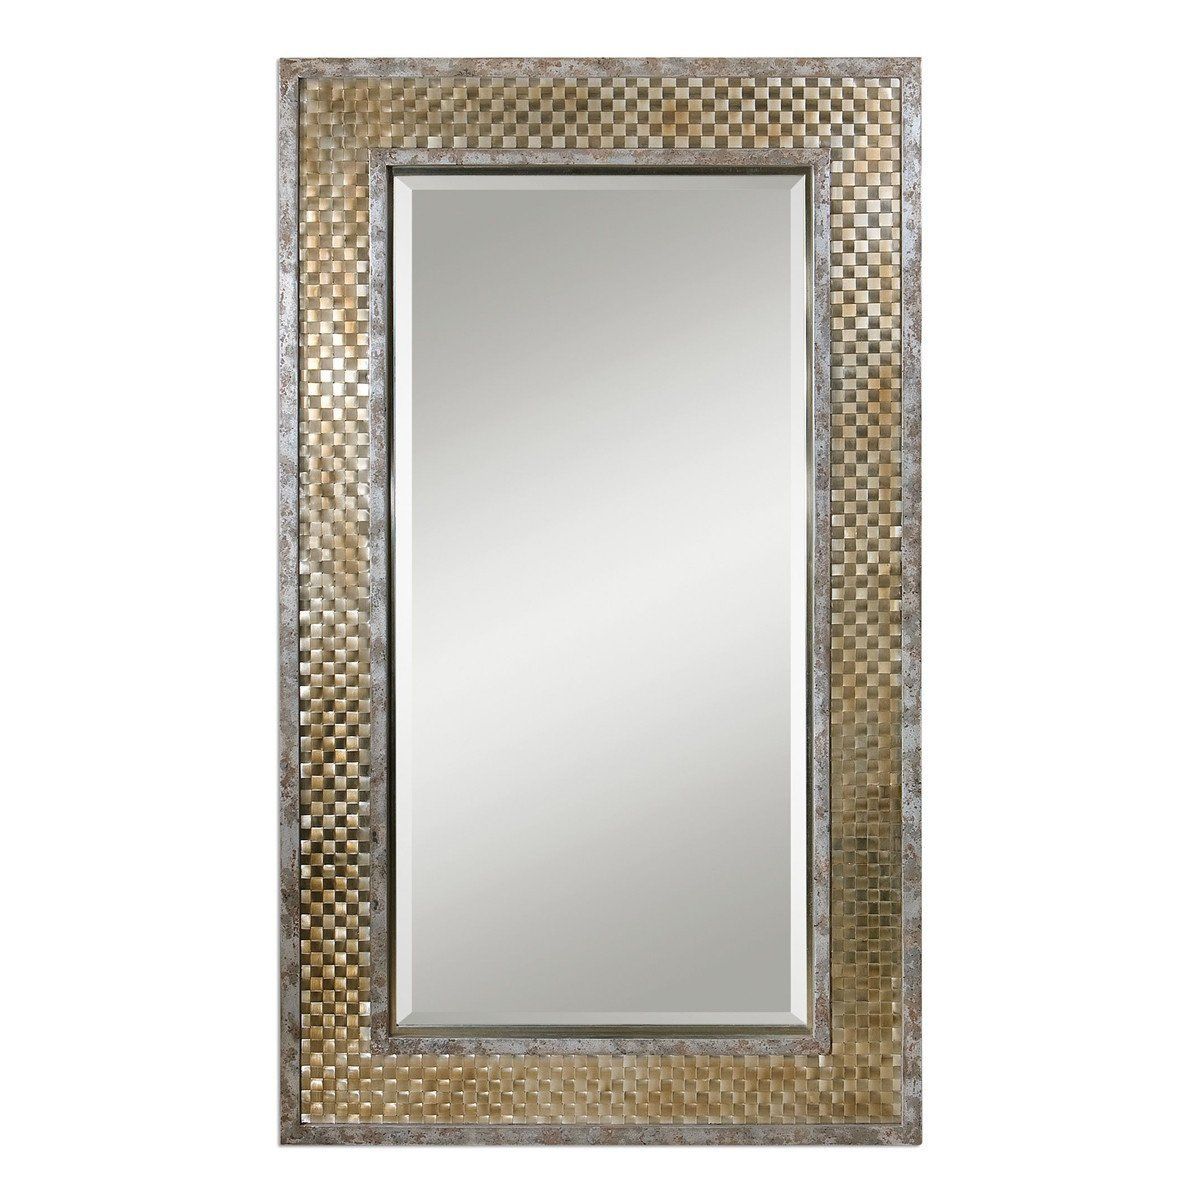 Mondego Woven Nickel Mirror | Brushed Nickel Mirror, Rectangular Mirror For Brushed Nickel Rectangular Wall Mirrors (View 6 of 15)